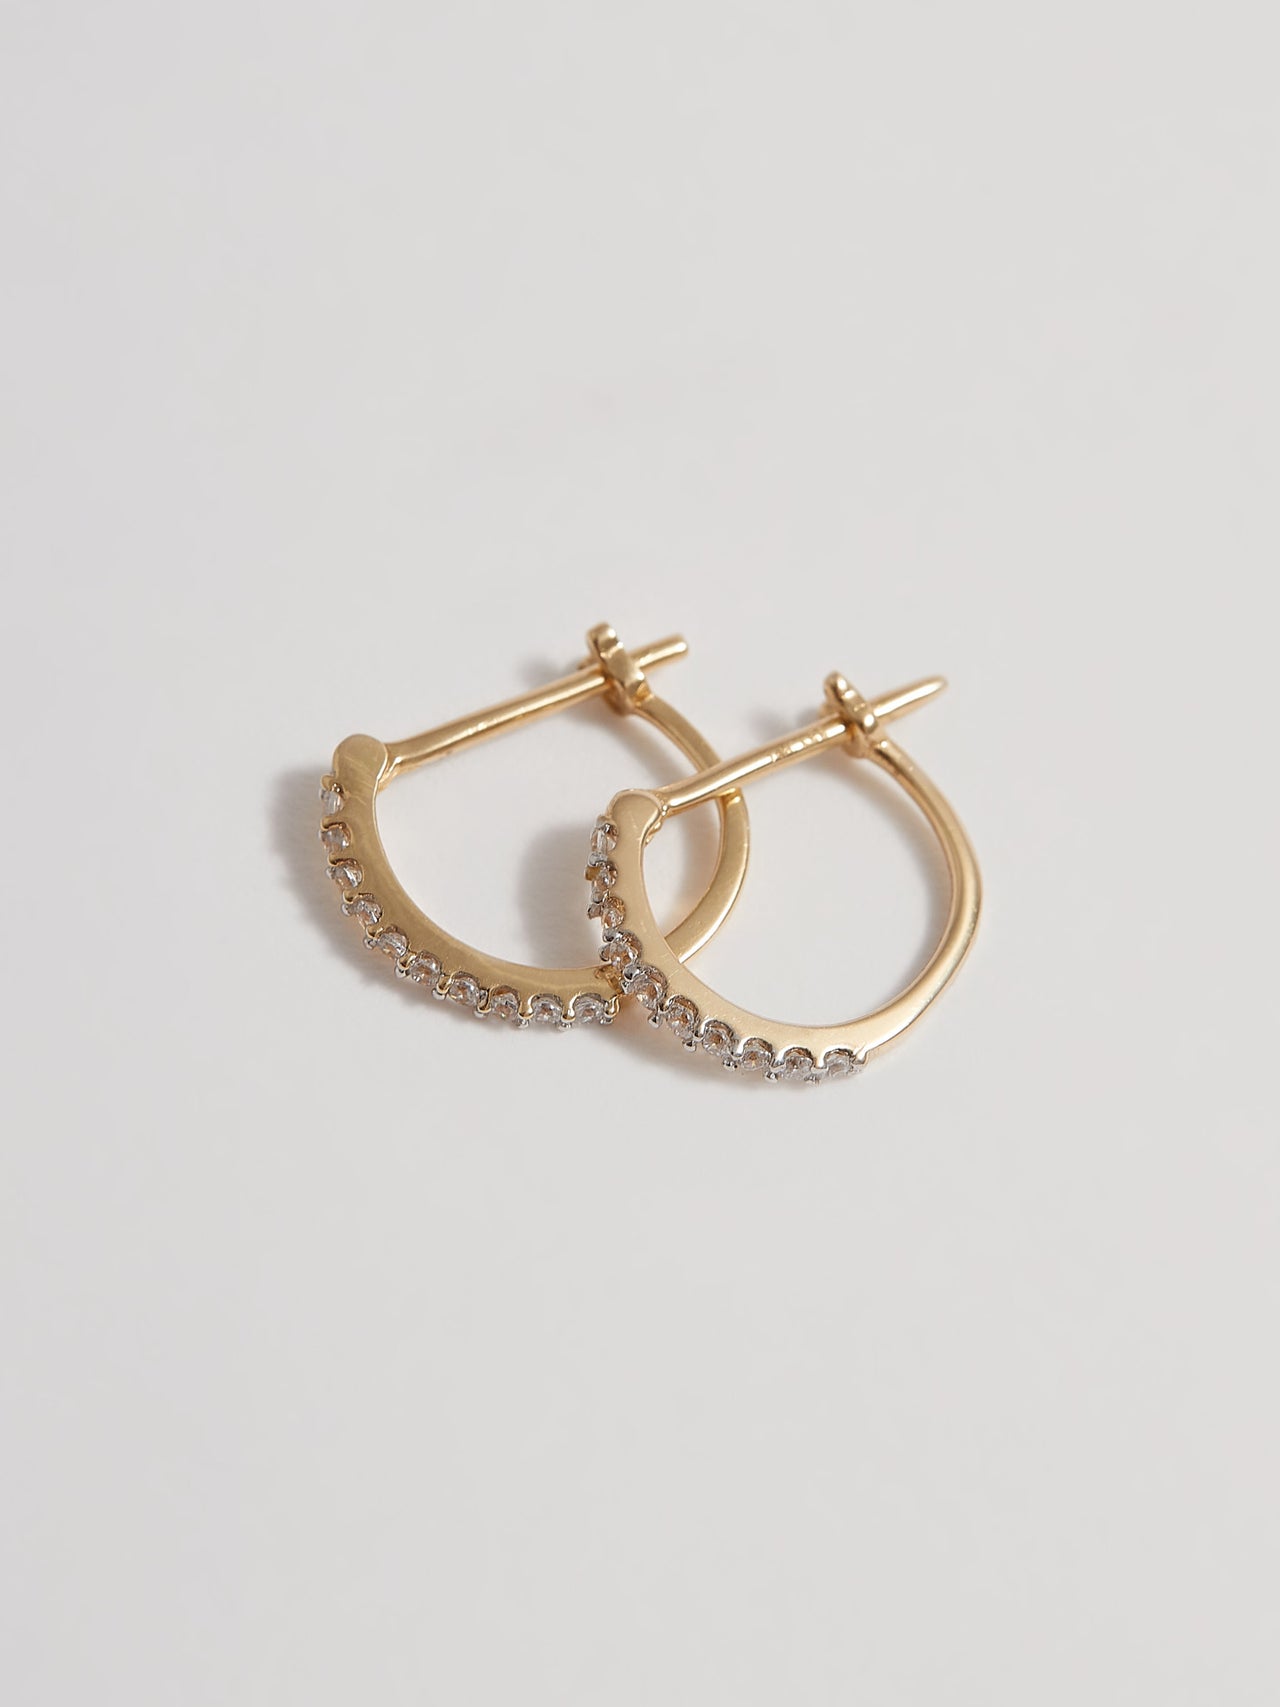 Product shot of the Petite Pave Huggies (14KT Yellow Gold 10mm Diameter 1.1mm CZ) Background: Grey backdrop